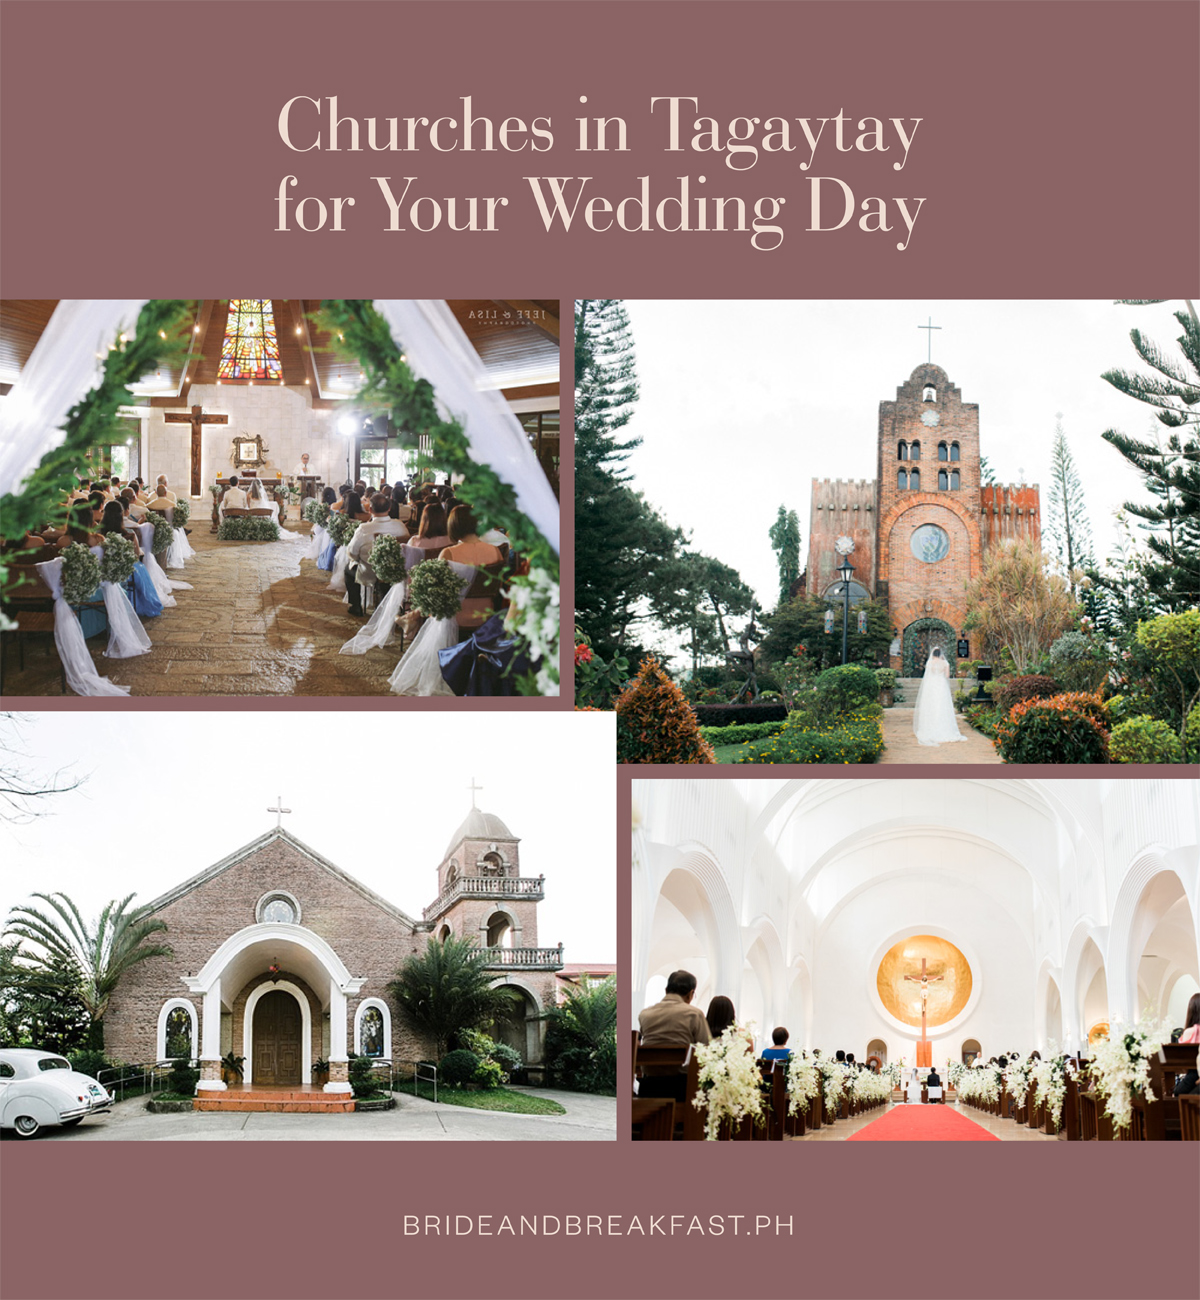 Churches in Tagaytay for Your Wedding Day